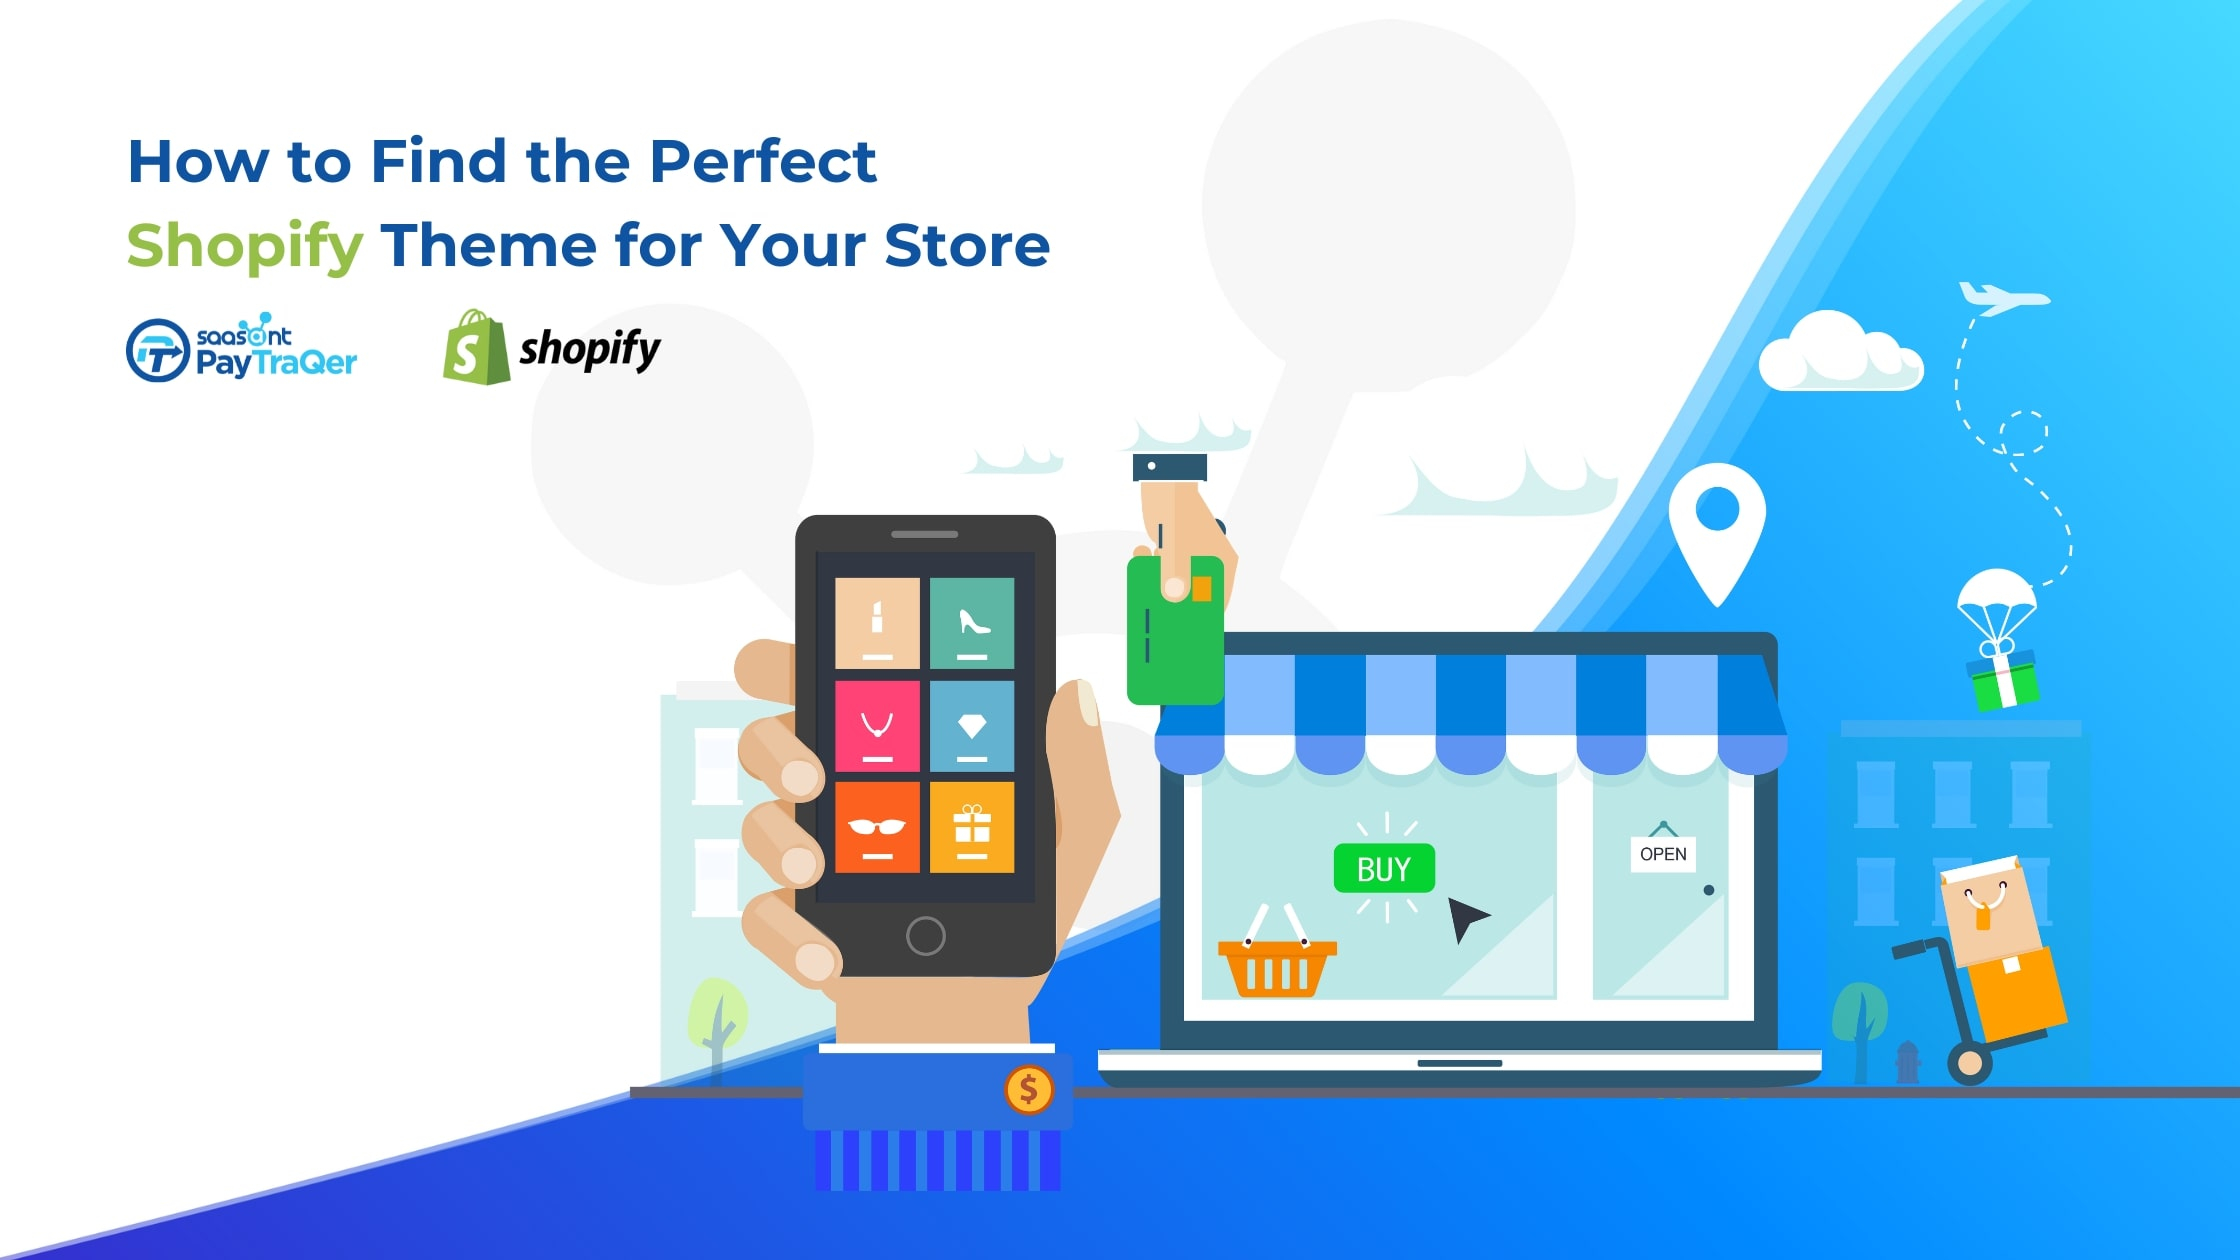 How to Find the Perfect Shopify Theme for Your Store